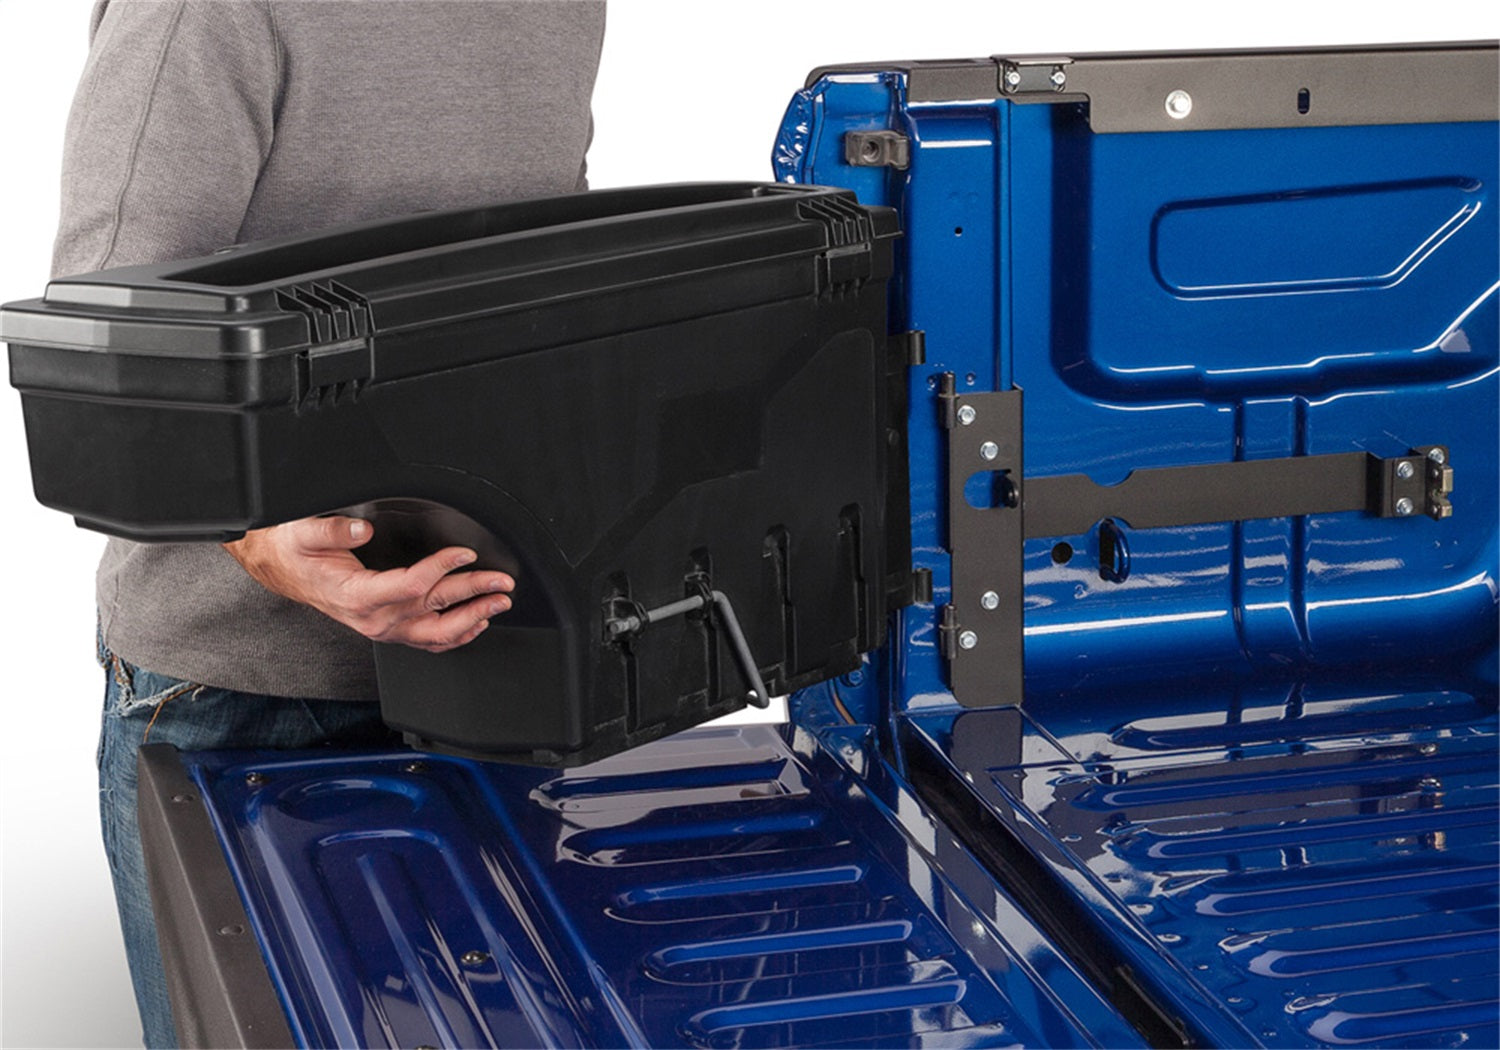 UnderCover SC403D Swing Case Storage Box Fits 19-22 Tacoma